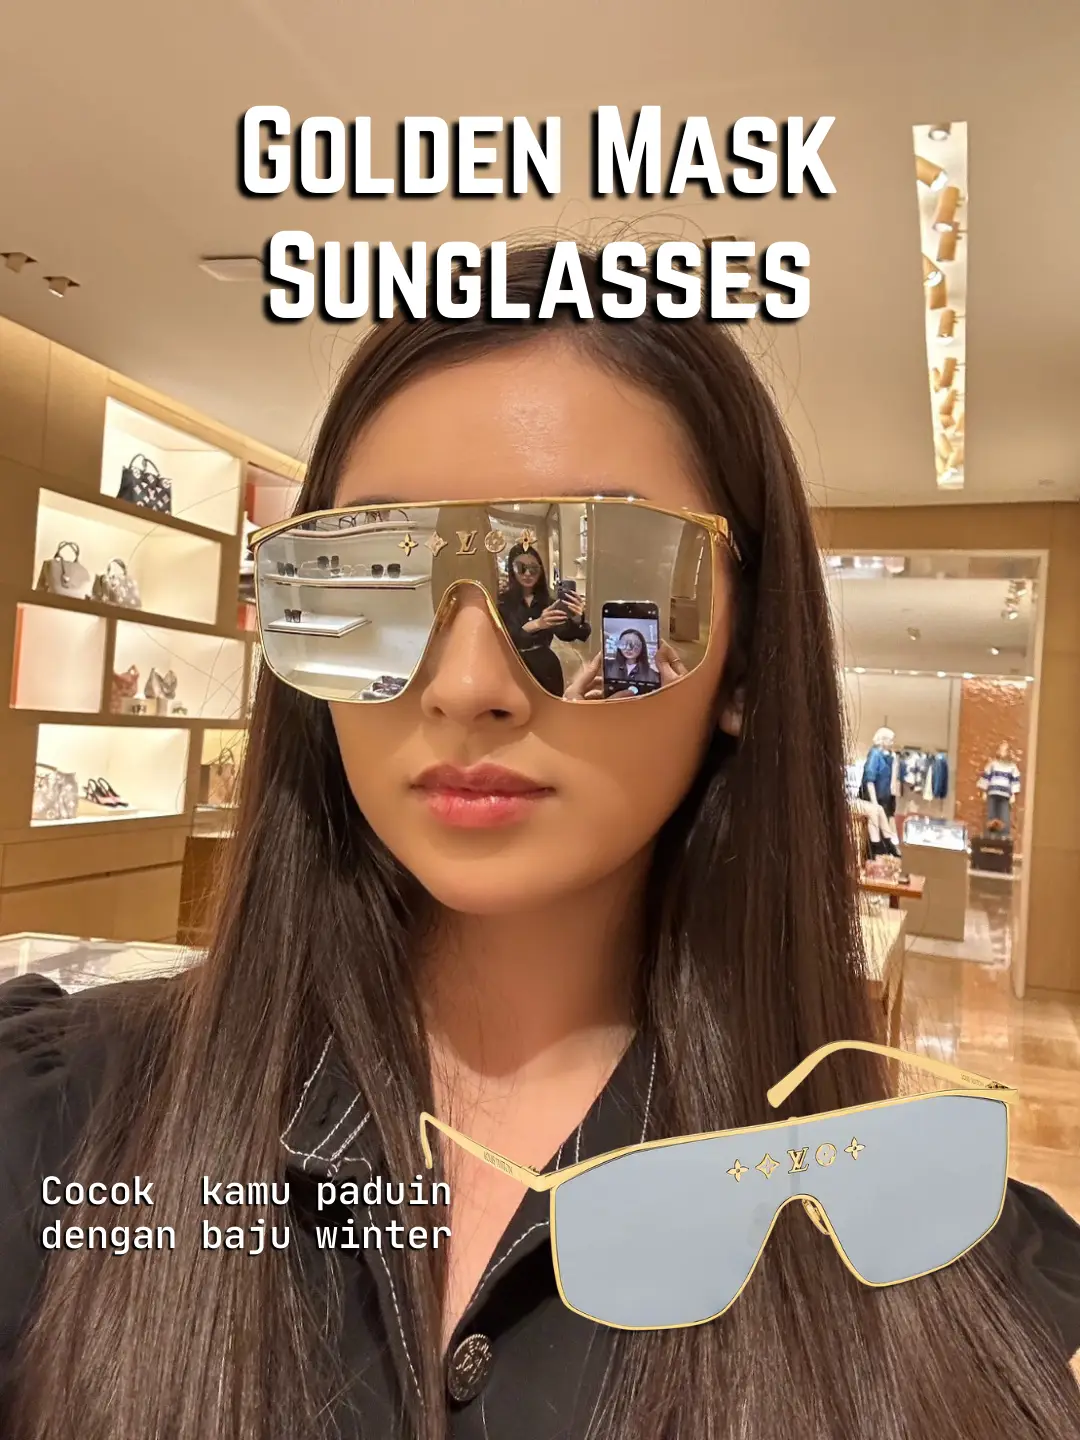 Try on Louis Vuitton Glasses 👓  Gallery posted by Regienashael